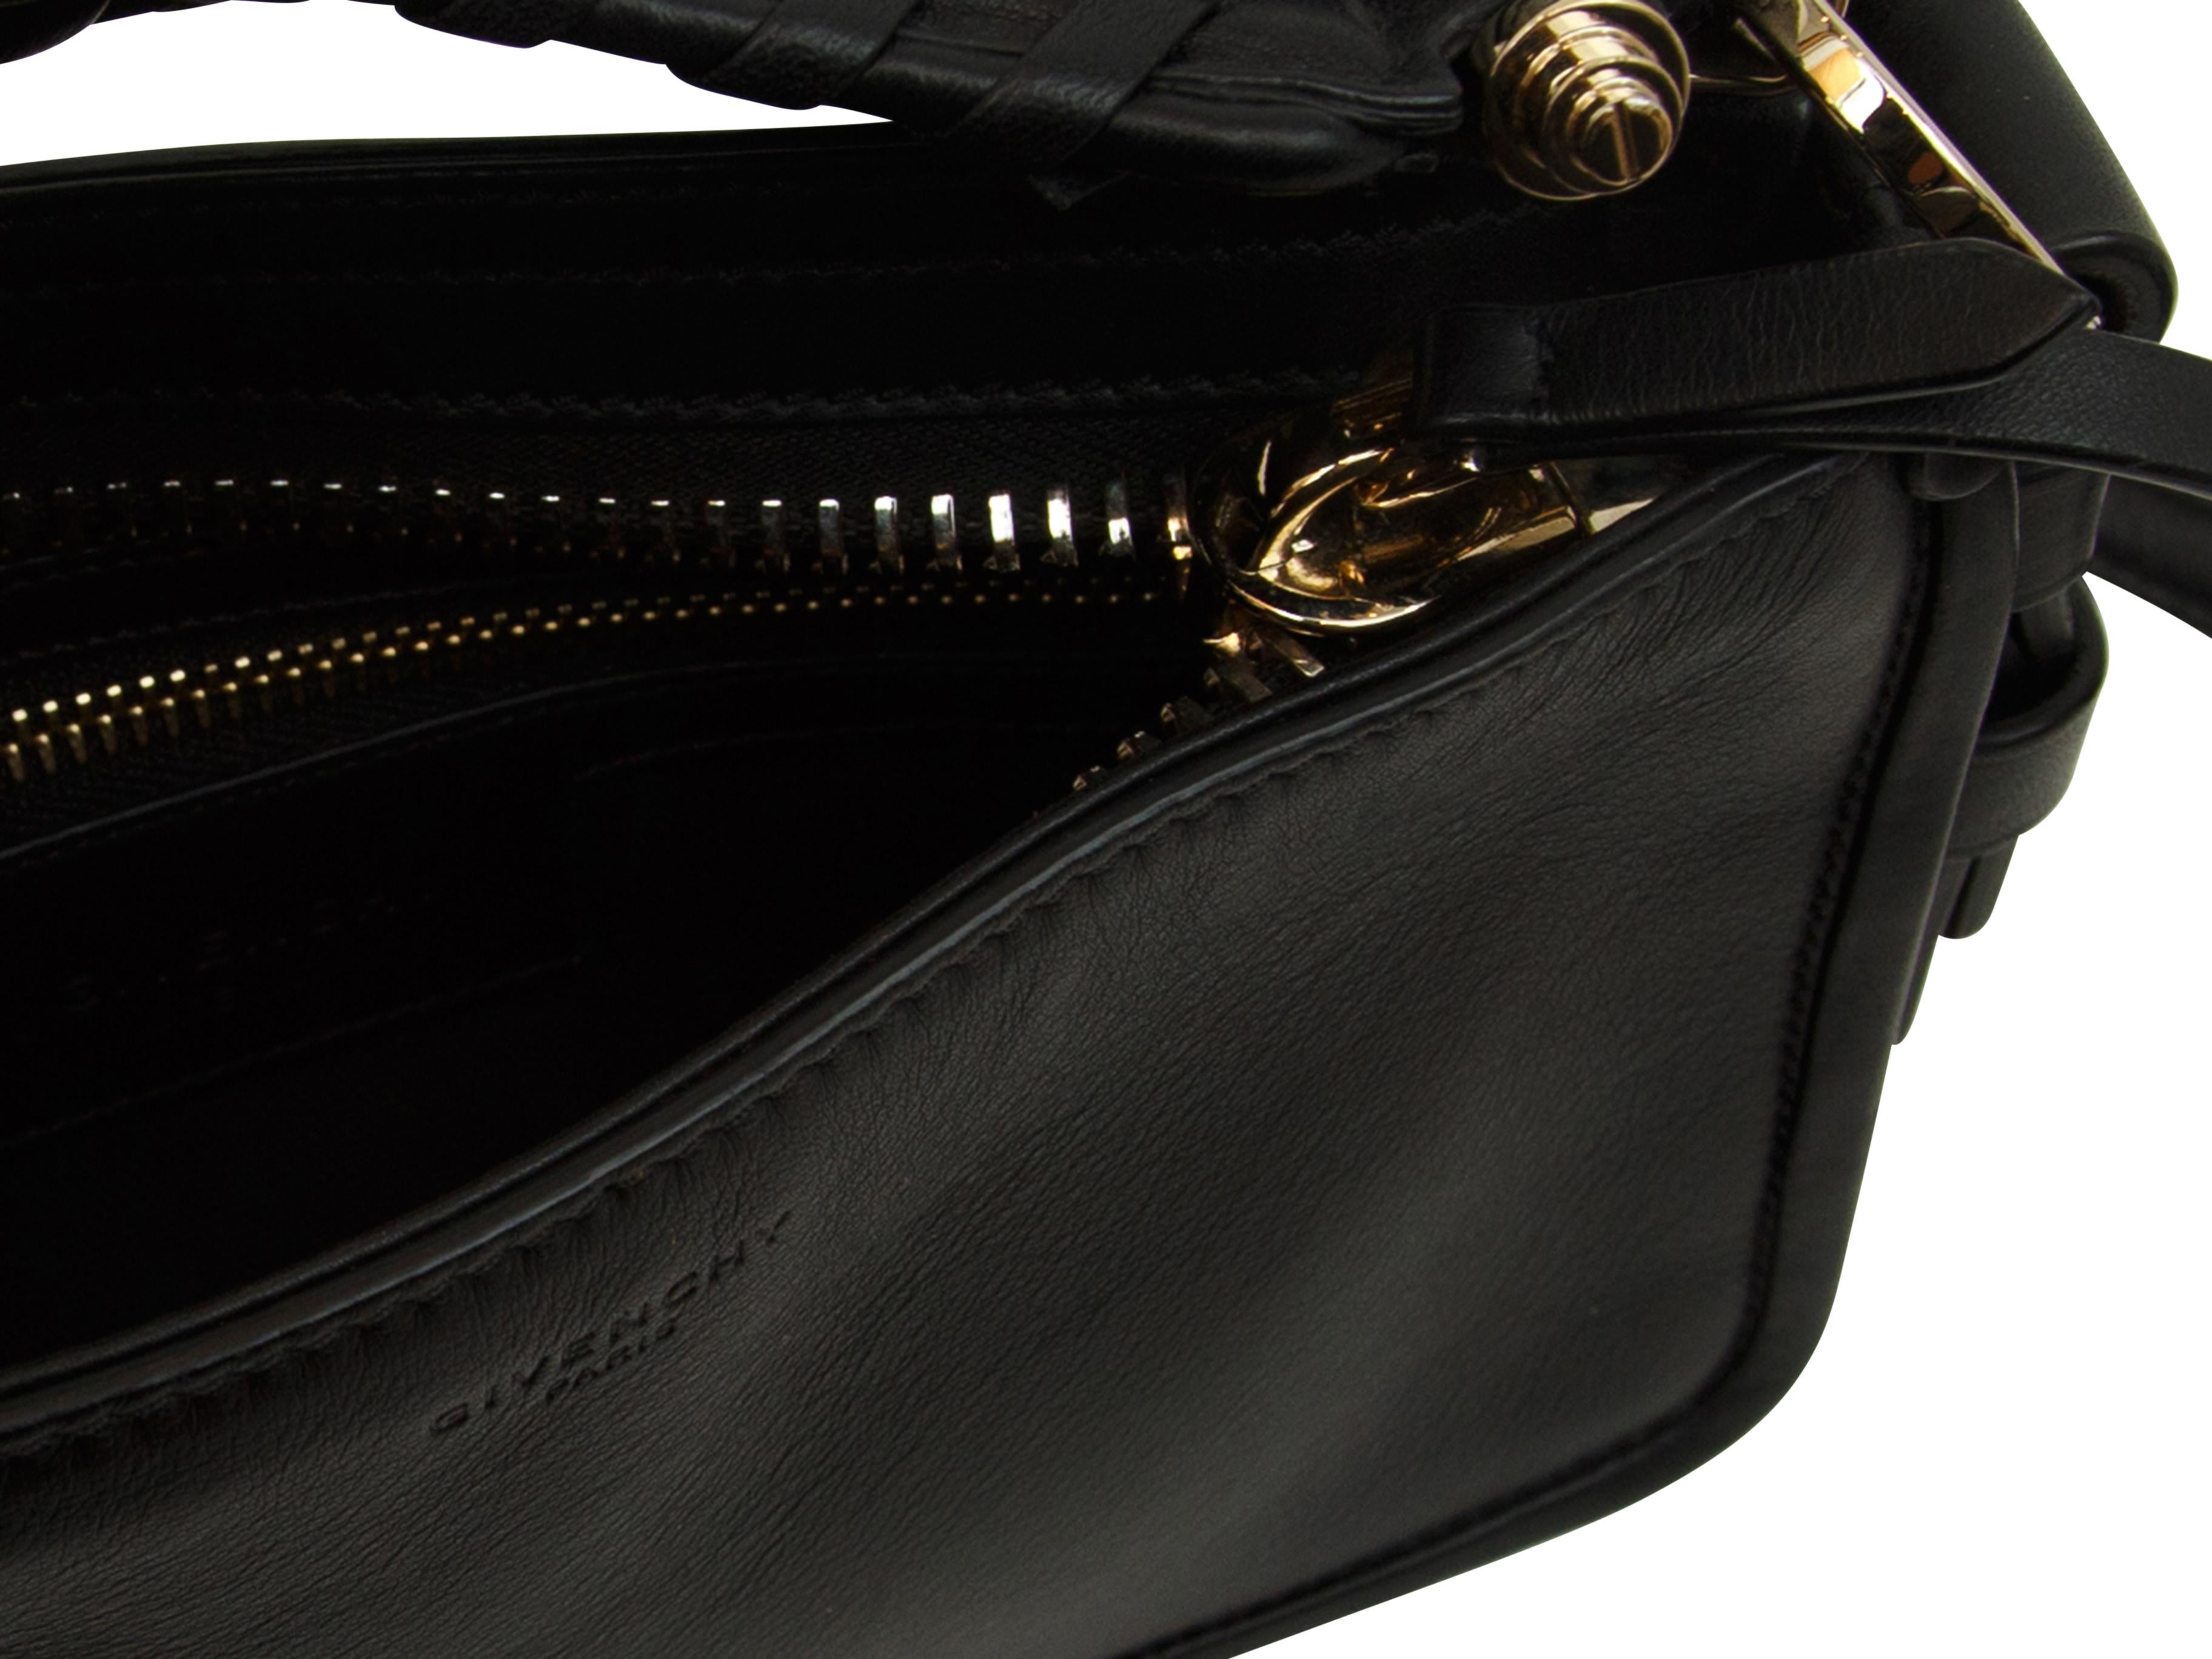 Product details:   Givenchy's Obsidia Clutch in Black can be worn as a clutch bag; simply carry it by the top handle. Change the look by using the shoulder strap and dangle it from your shoulder. The bag has a top zippered closure, the top handle is